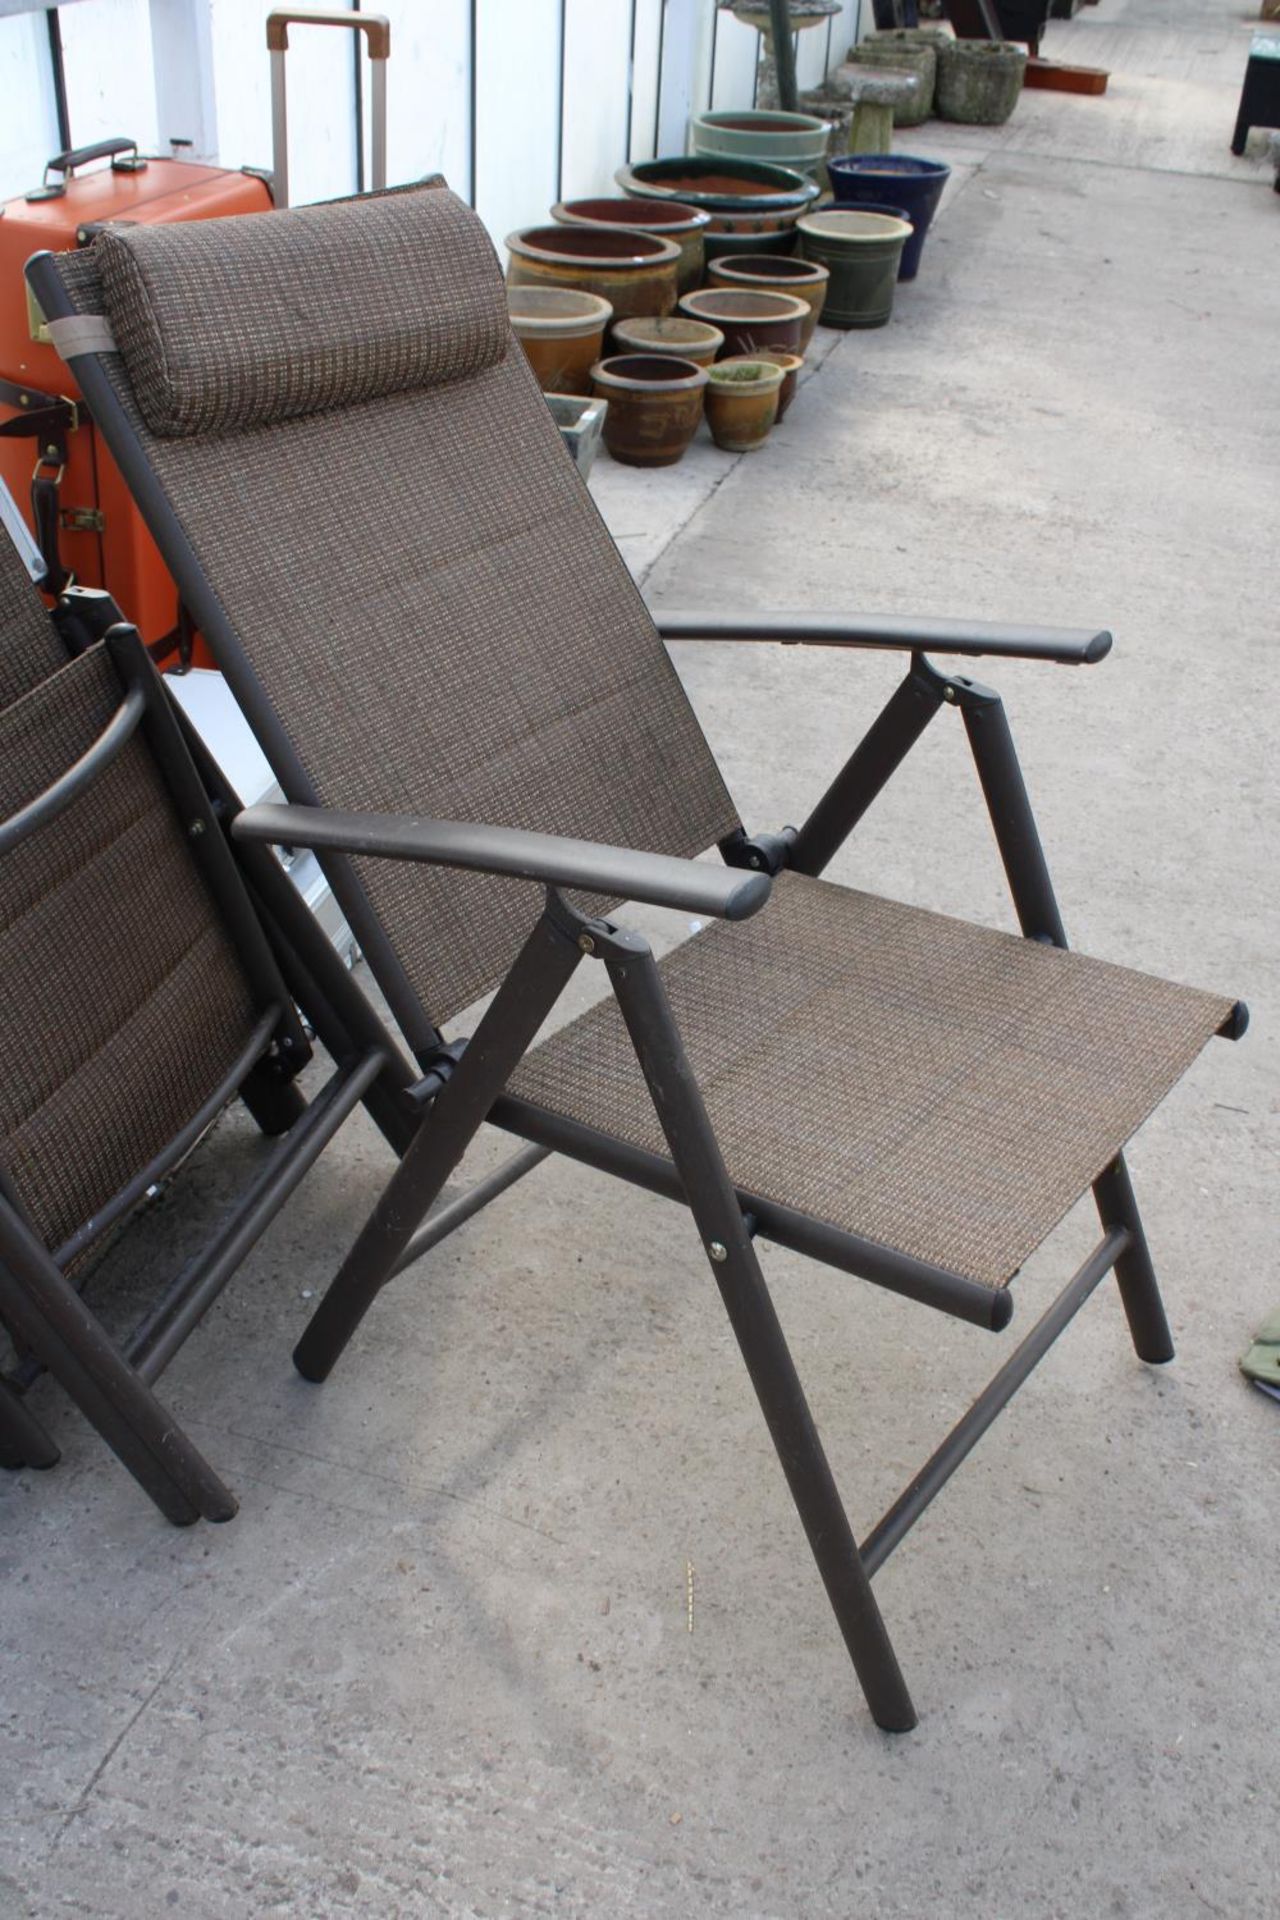 A SET OF SIX BROWN METAL FOLDING GARDEN CHAIRS - Image 3 of 3